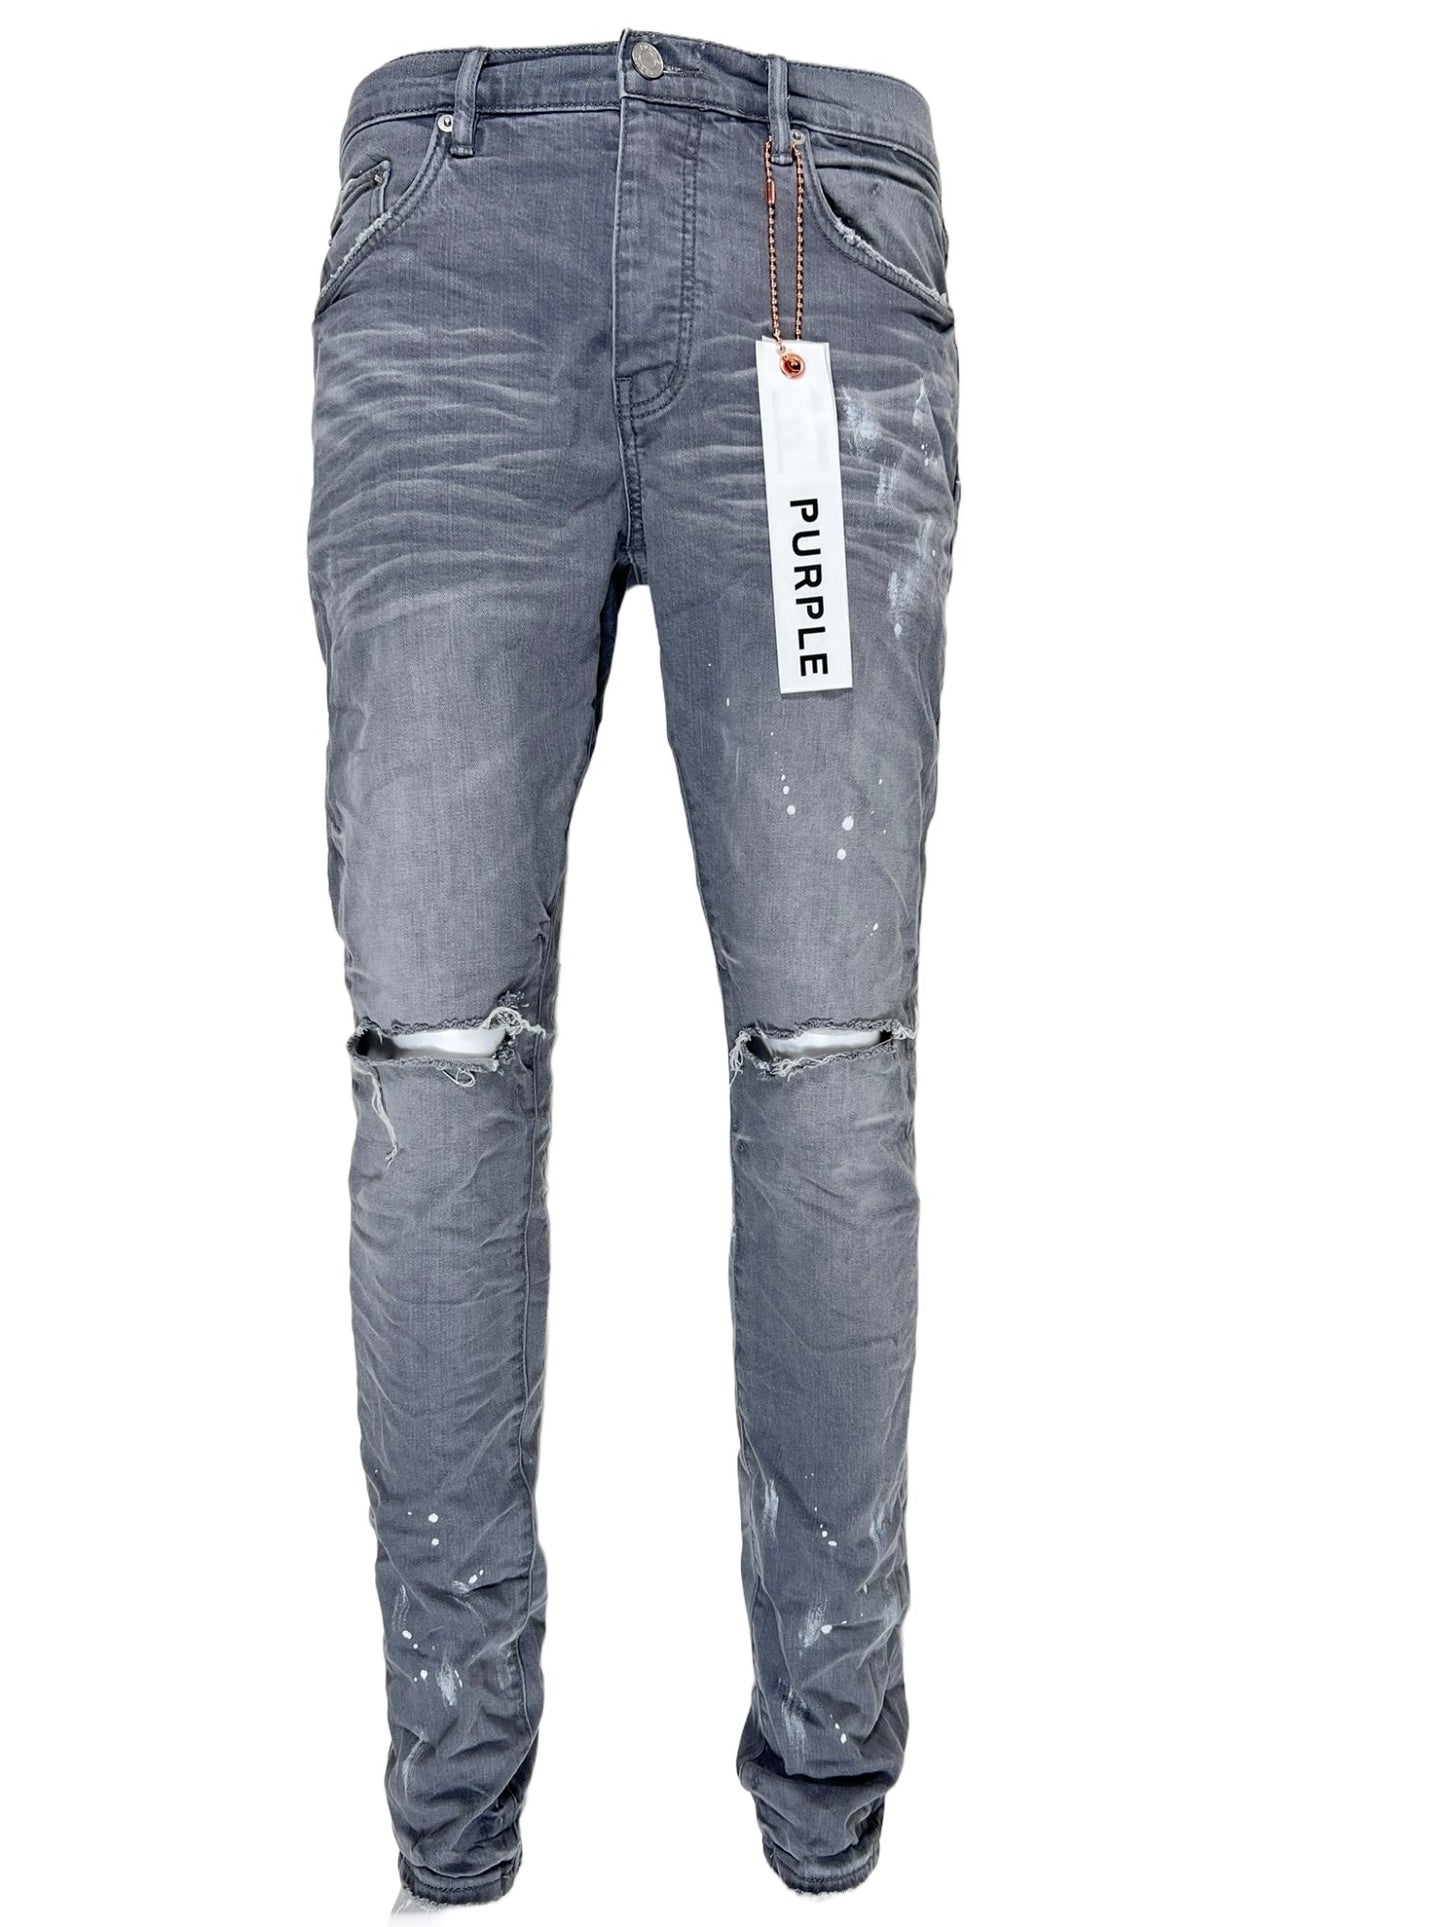 A pair of PURPLE BRAND JEANS P001-WGKS WORN GREY KNEE SLIT with a tag on them, featuring reinforced belt loops for enhanced durability.